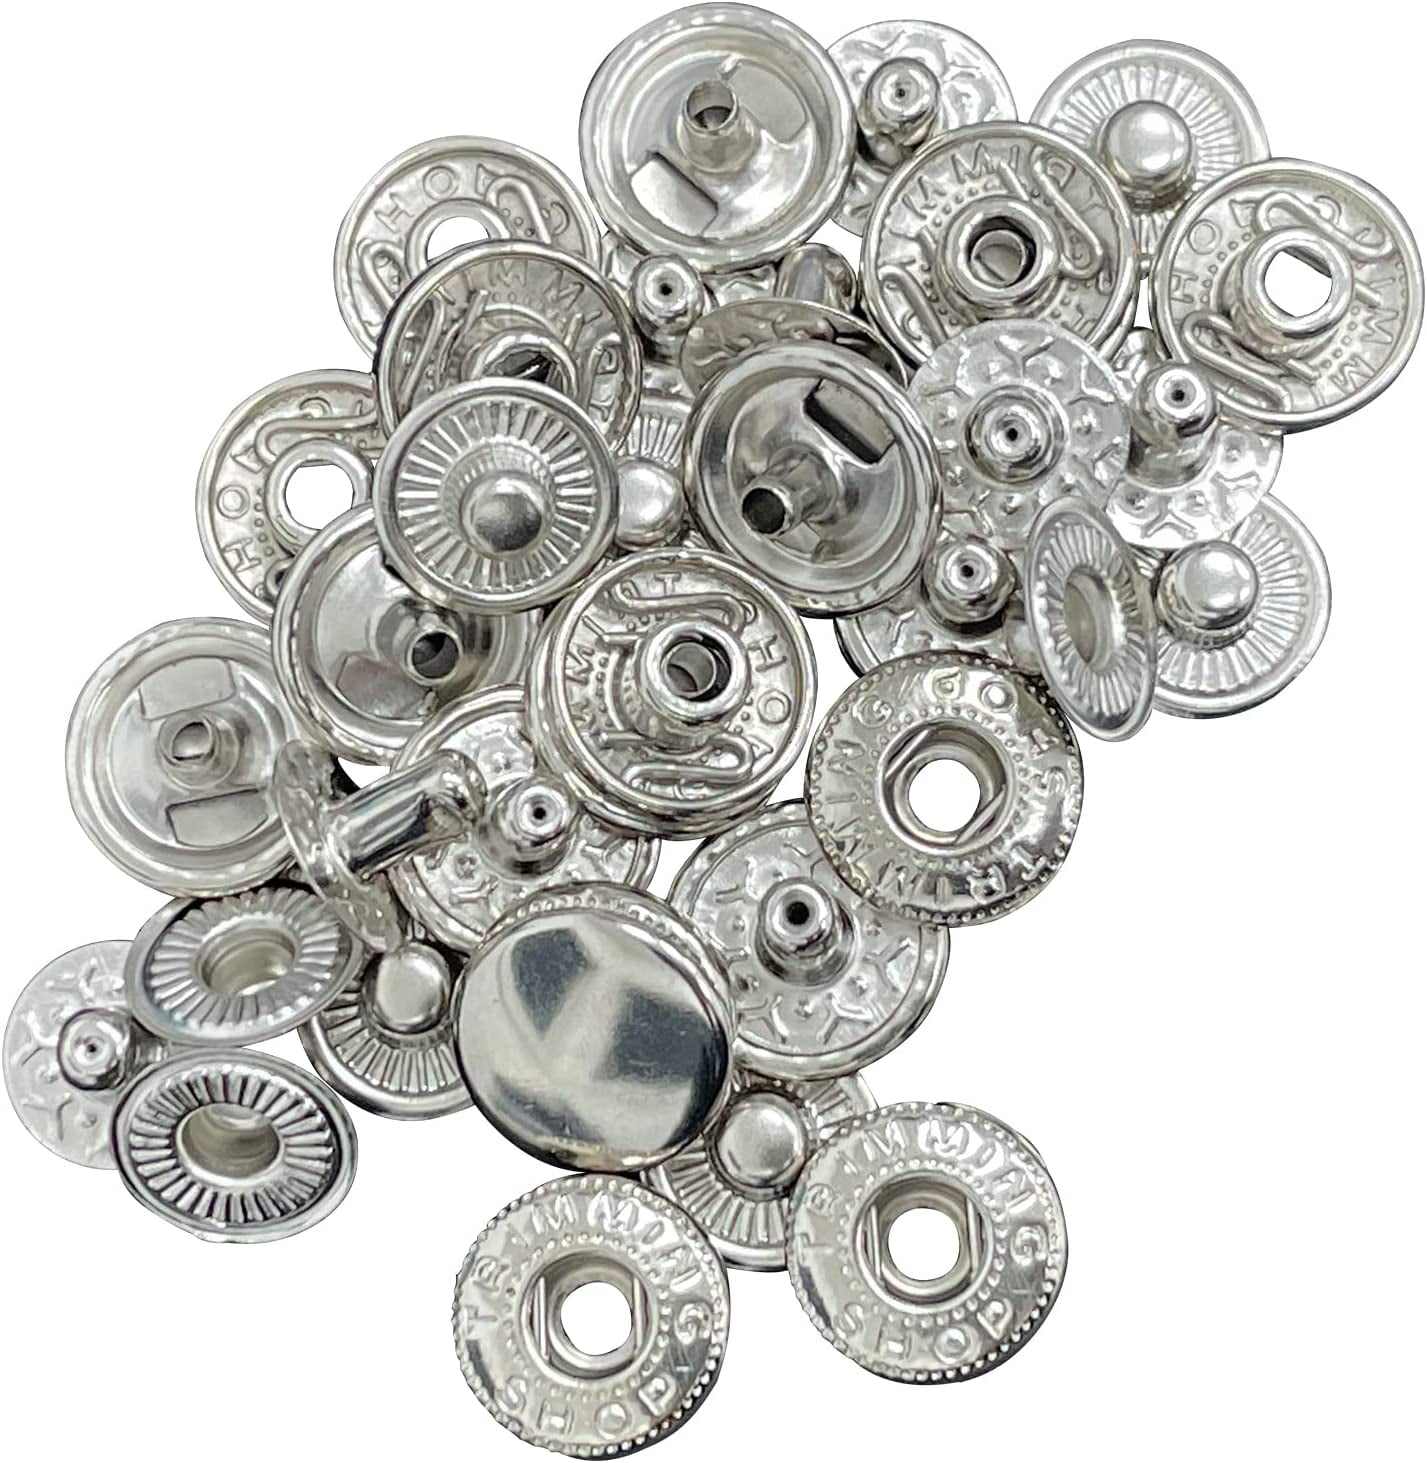 Trimming Shop 20mm S Spring Press Studs 4 Part, Durable and Lightweight, Metal  Snap Buttons Fasteners for Jackets, DIY Leathercrafts, Sewing Clothing,  Purses, Gunmetal Black, 10pcs 